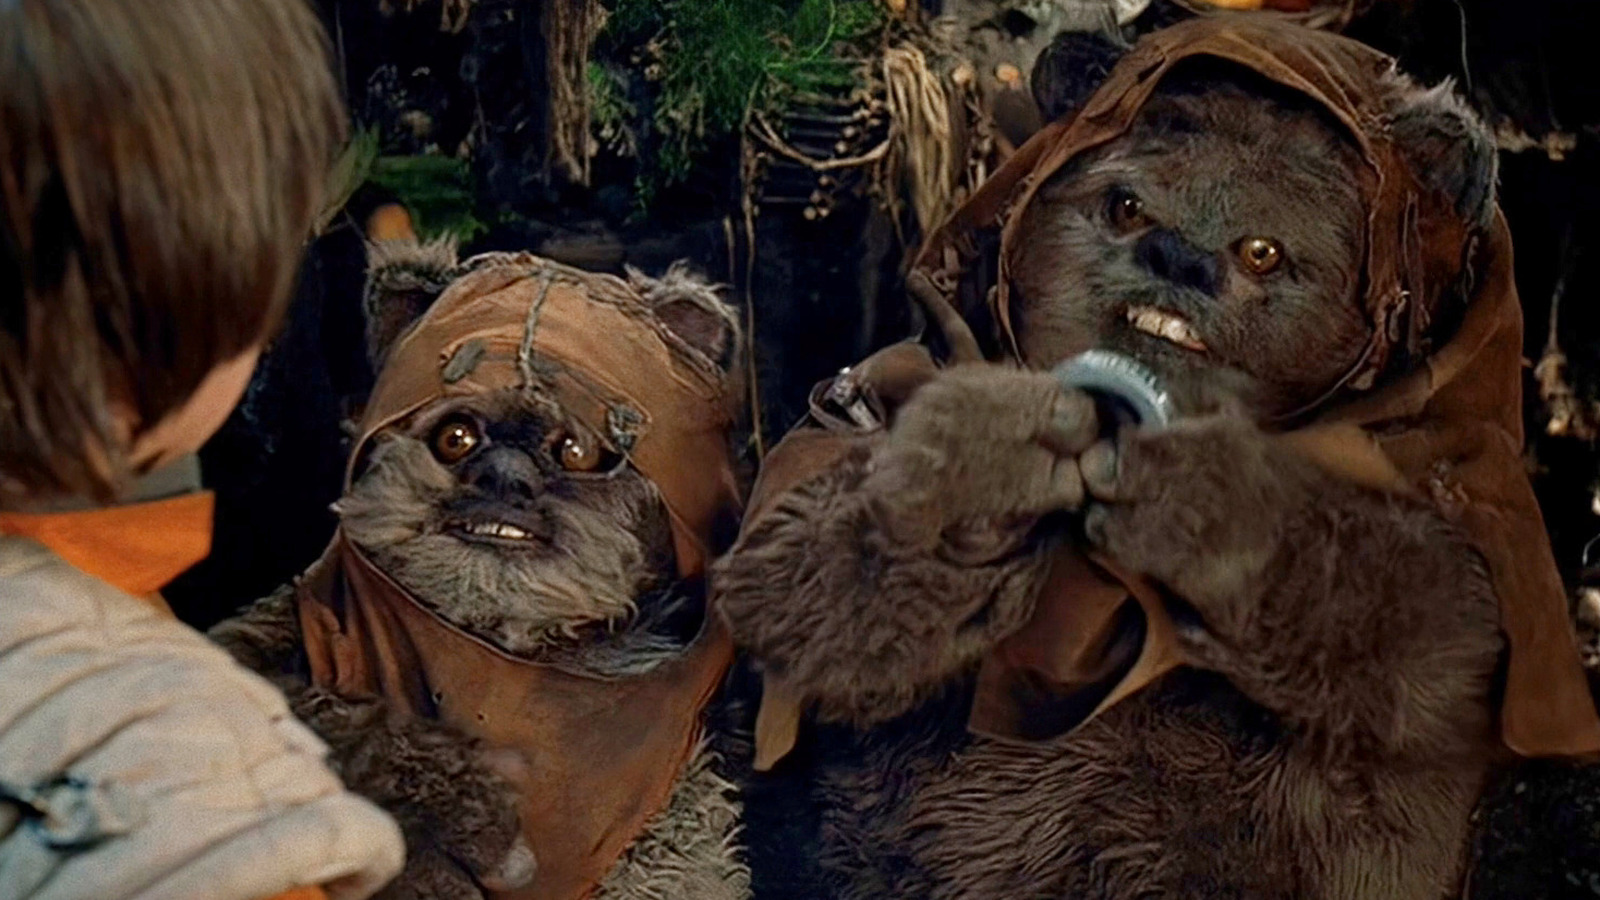 Star Wars' The Ewok Adventure Has A Connection To Rudolph The
Red-Nosed Reindeer